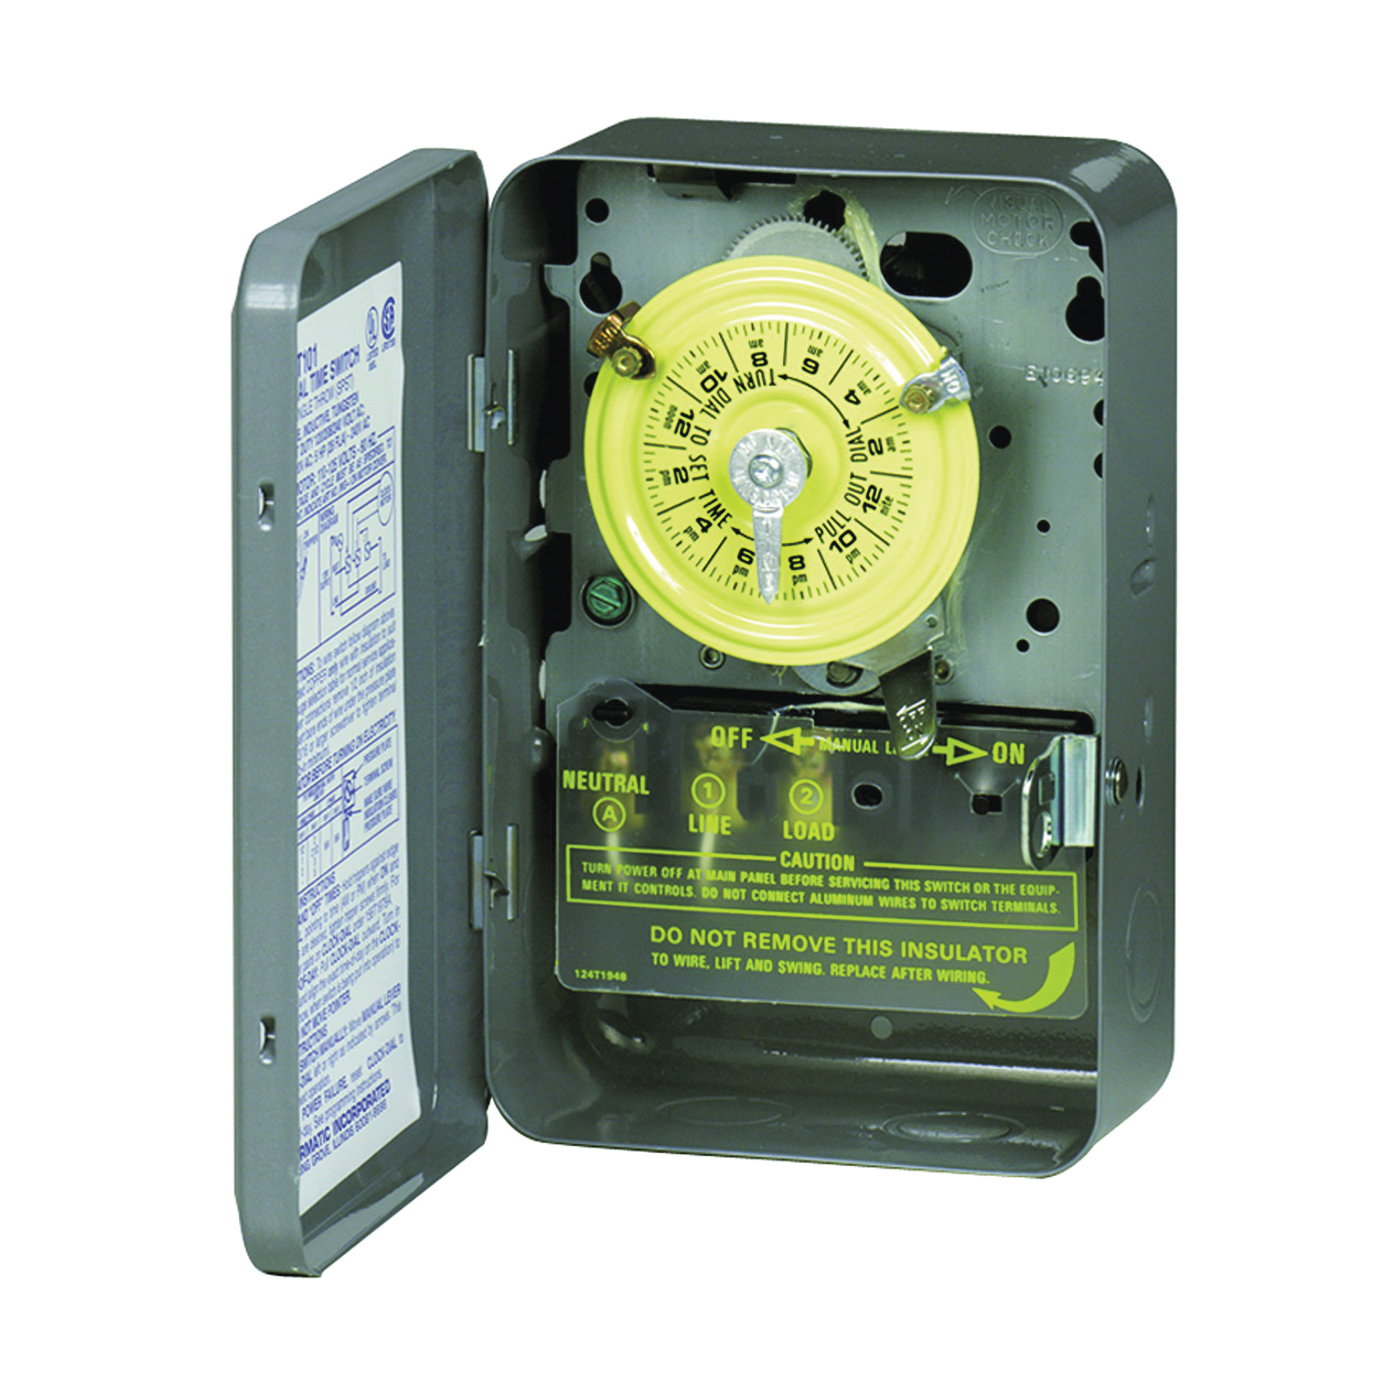 Intermatic T101 Mechanical Timer Switch, 40 A, 120 V, 3 W, 24 hr Time Setting, 12 On/Off Cycles Per Day Cycle - 1